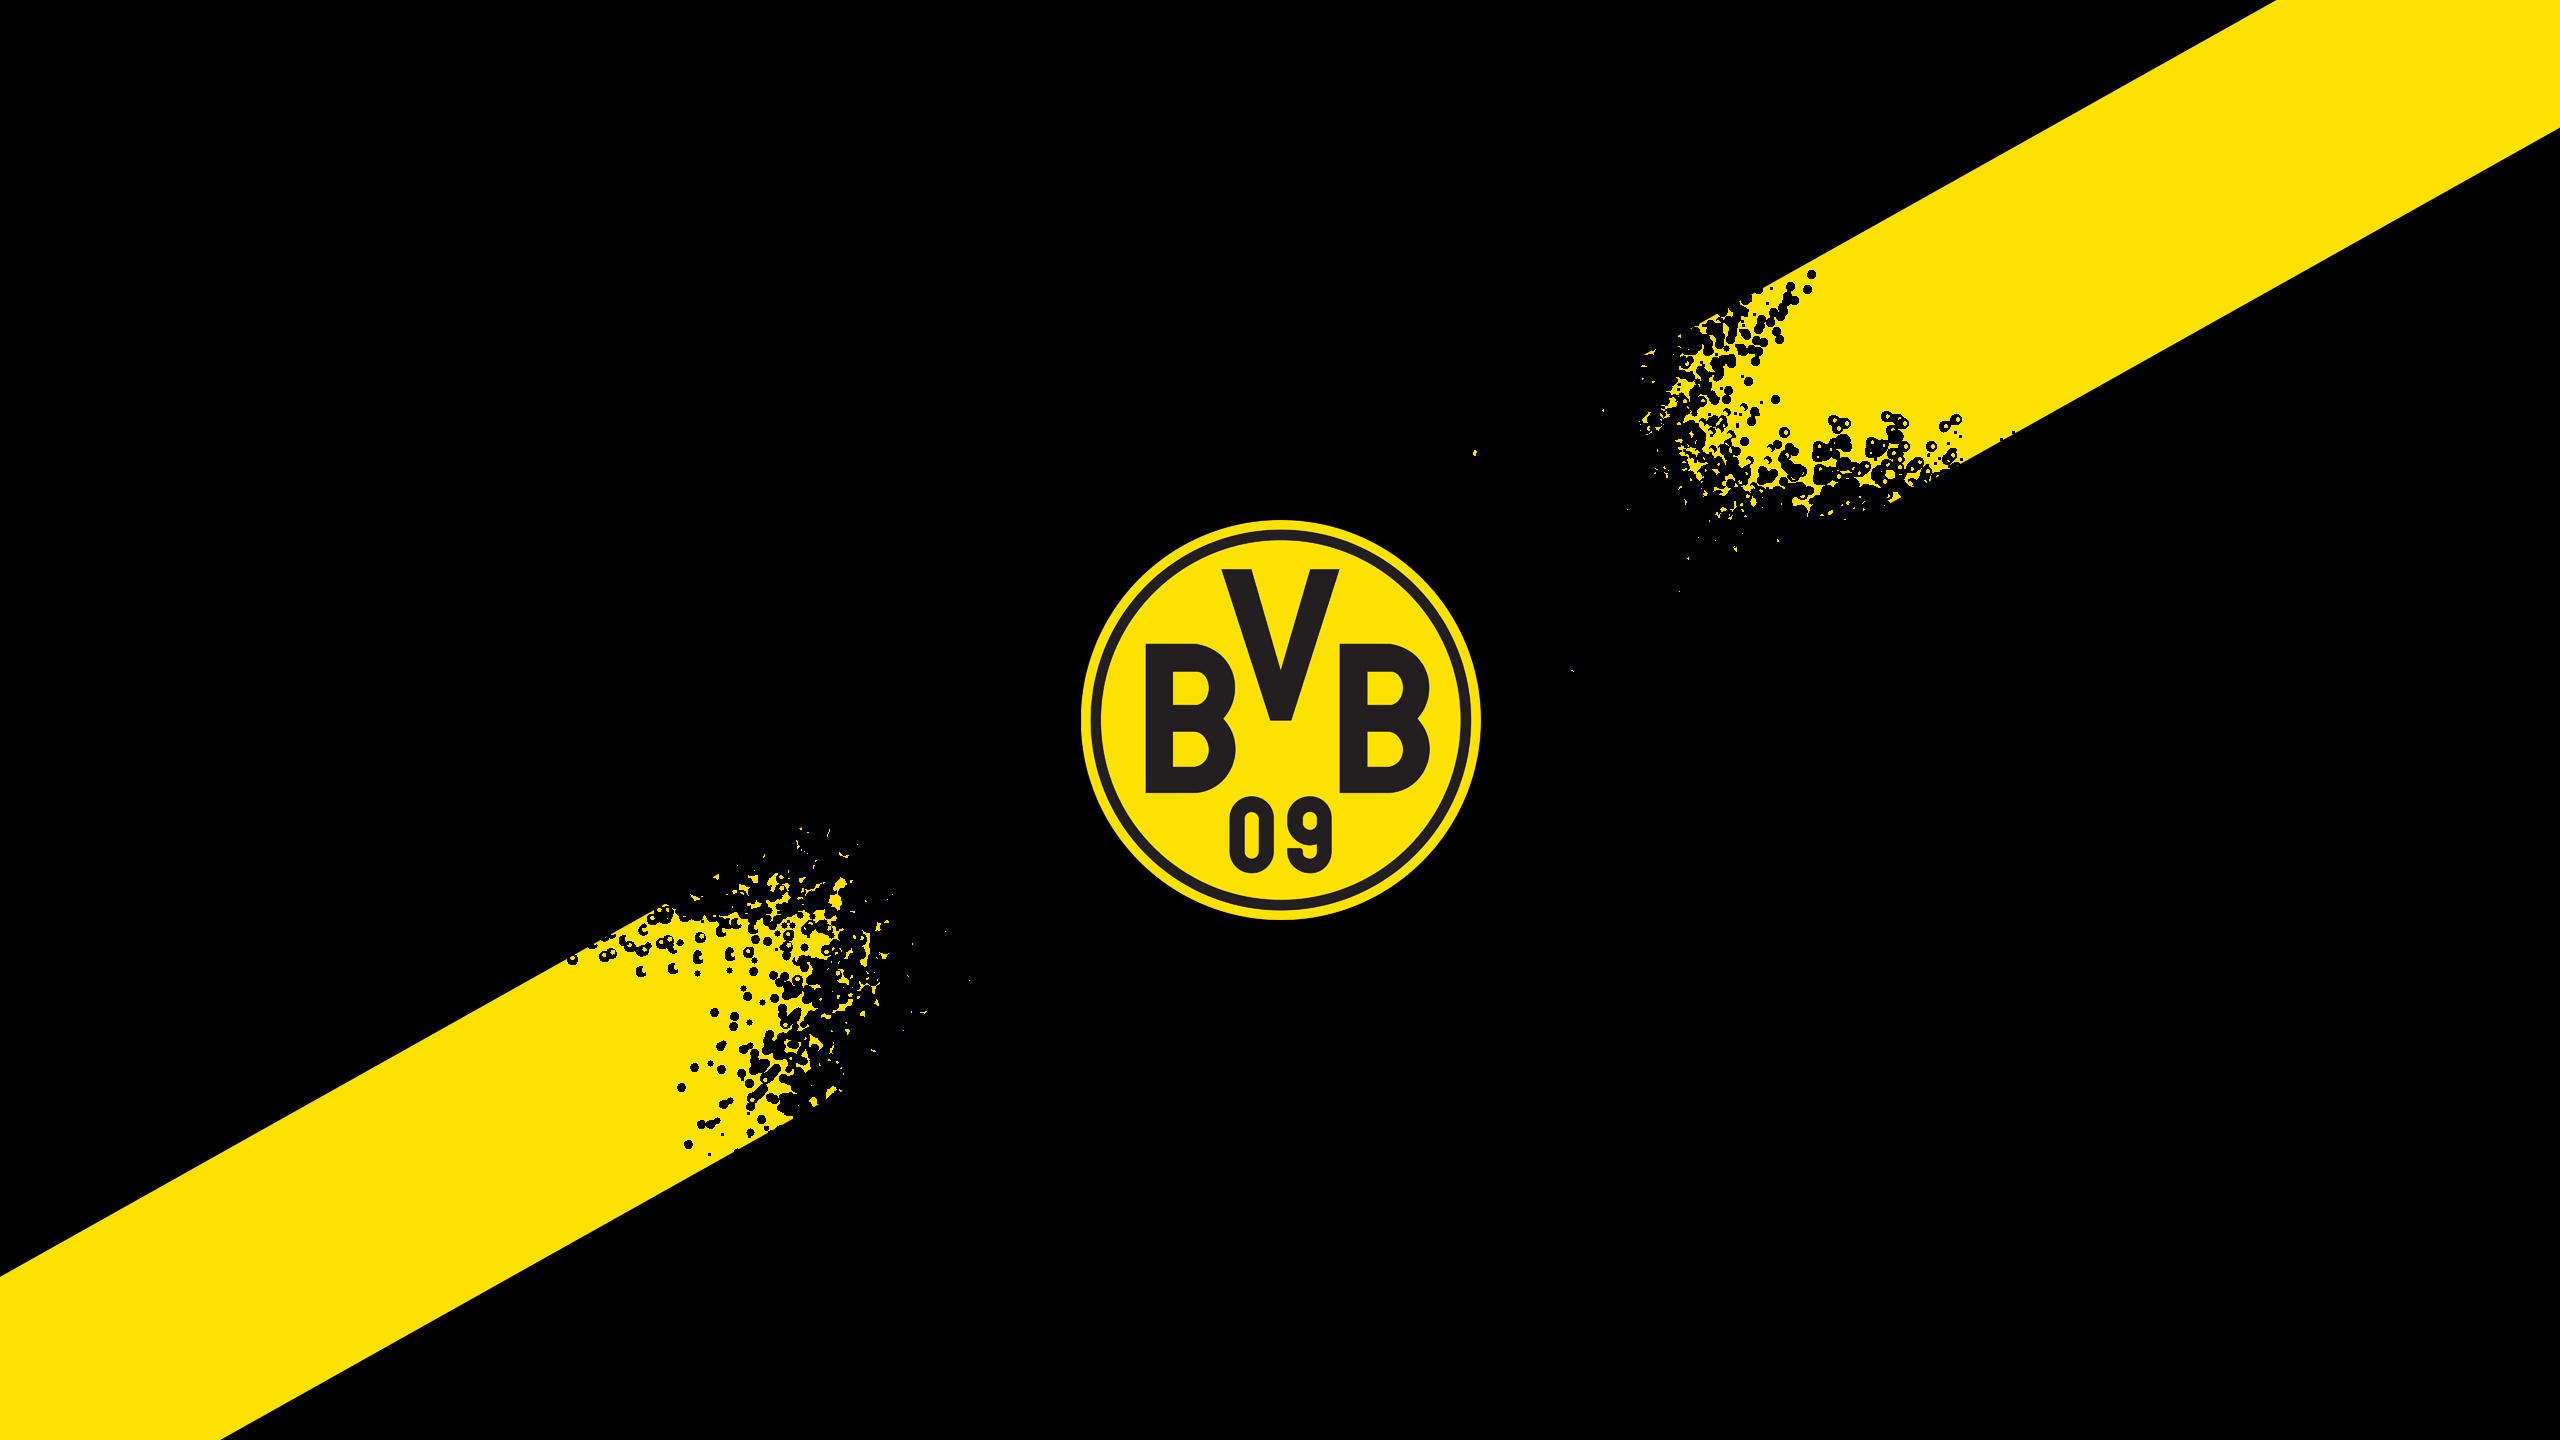 Borussia Dortmund: The first publicly traded club on the German stock market. 2560x1440 HD Wallpaper.